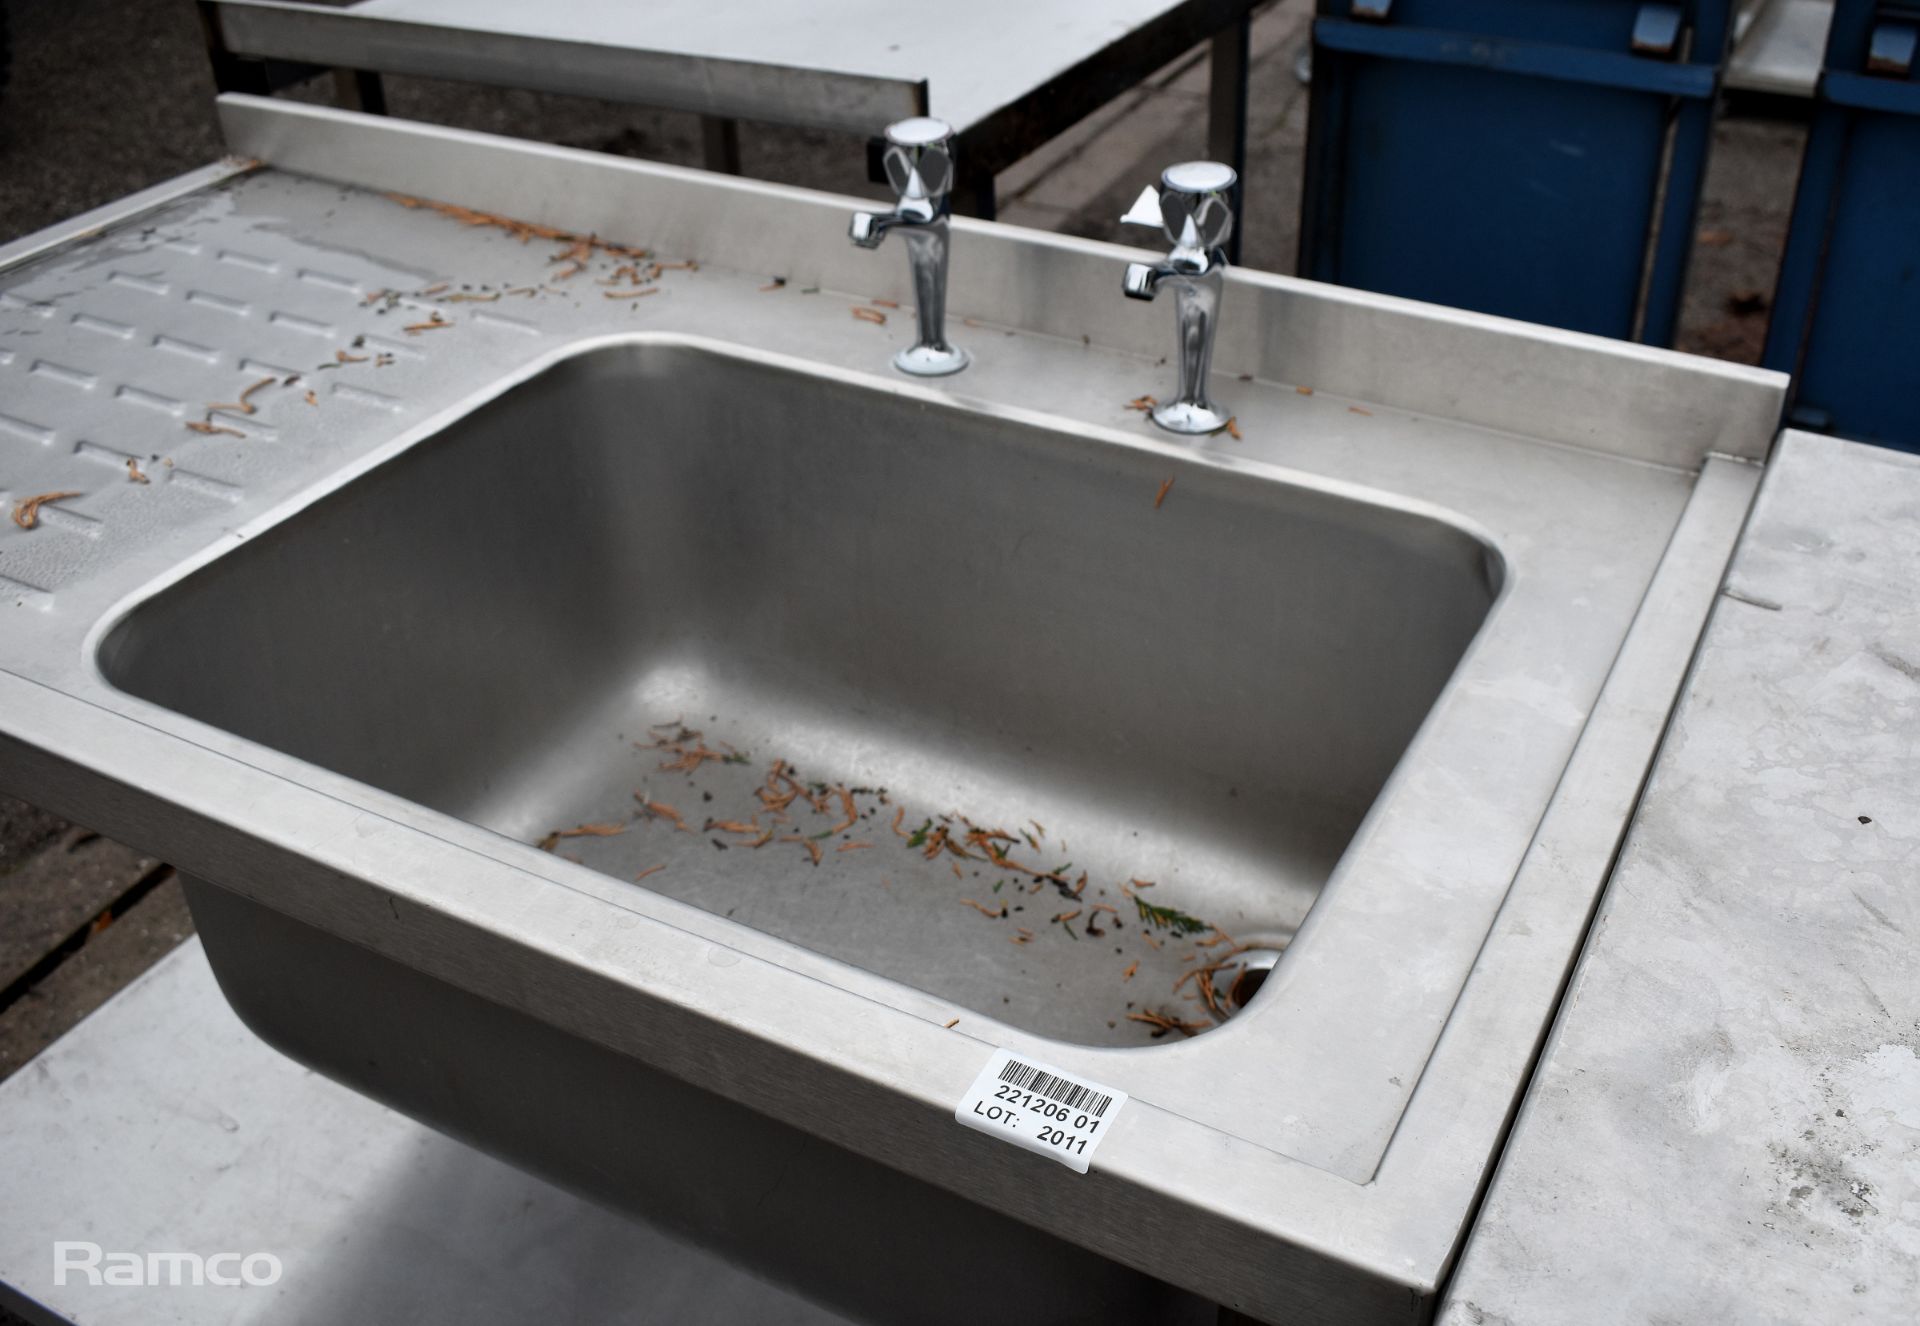 Stainless steel sink basin unit with shelf - 65 x 120 x 104cm - Image 3 of 4